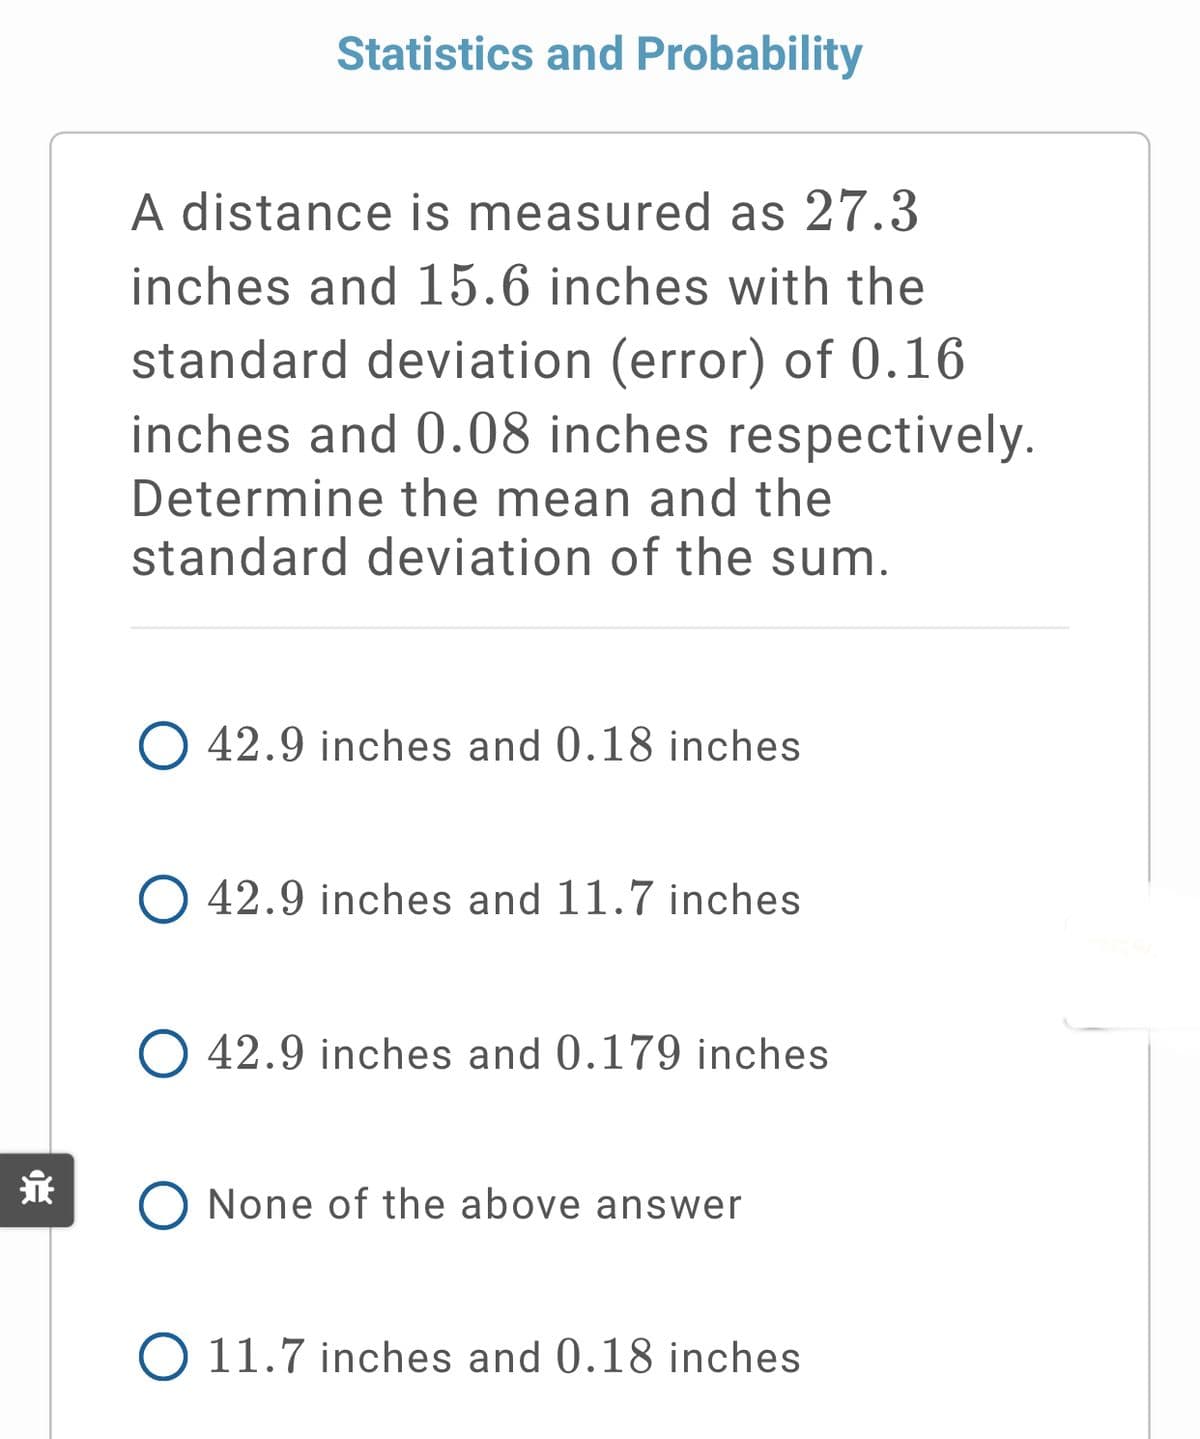 Statistics and Probability
A distance is measured as 27.3
inches and 15.6 inches with the
standard deviation (error) of 0.16
inches and 0.08 inches respectively.
Determine the mean and the
standard deviation of the sum.
O 42.9 inches and 0.18 inches
O 42.9 inches and 11.7 inches
O 42.9 inches and 0.179 inches
永
None of the above answer
O 11.7 inches and 0.18 inches
